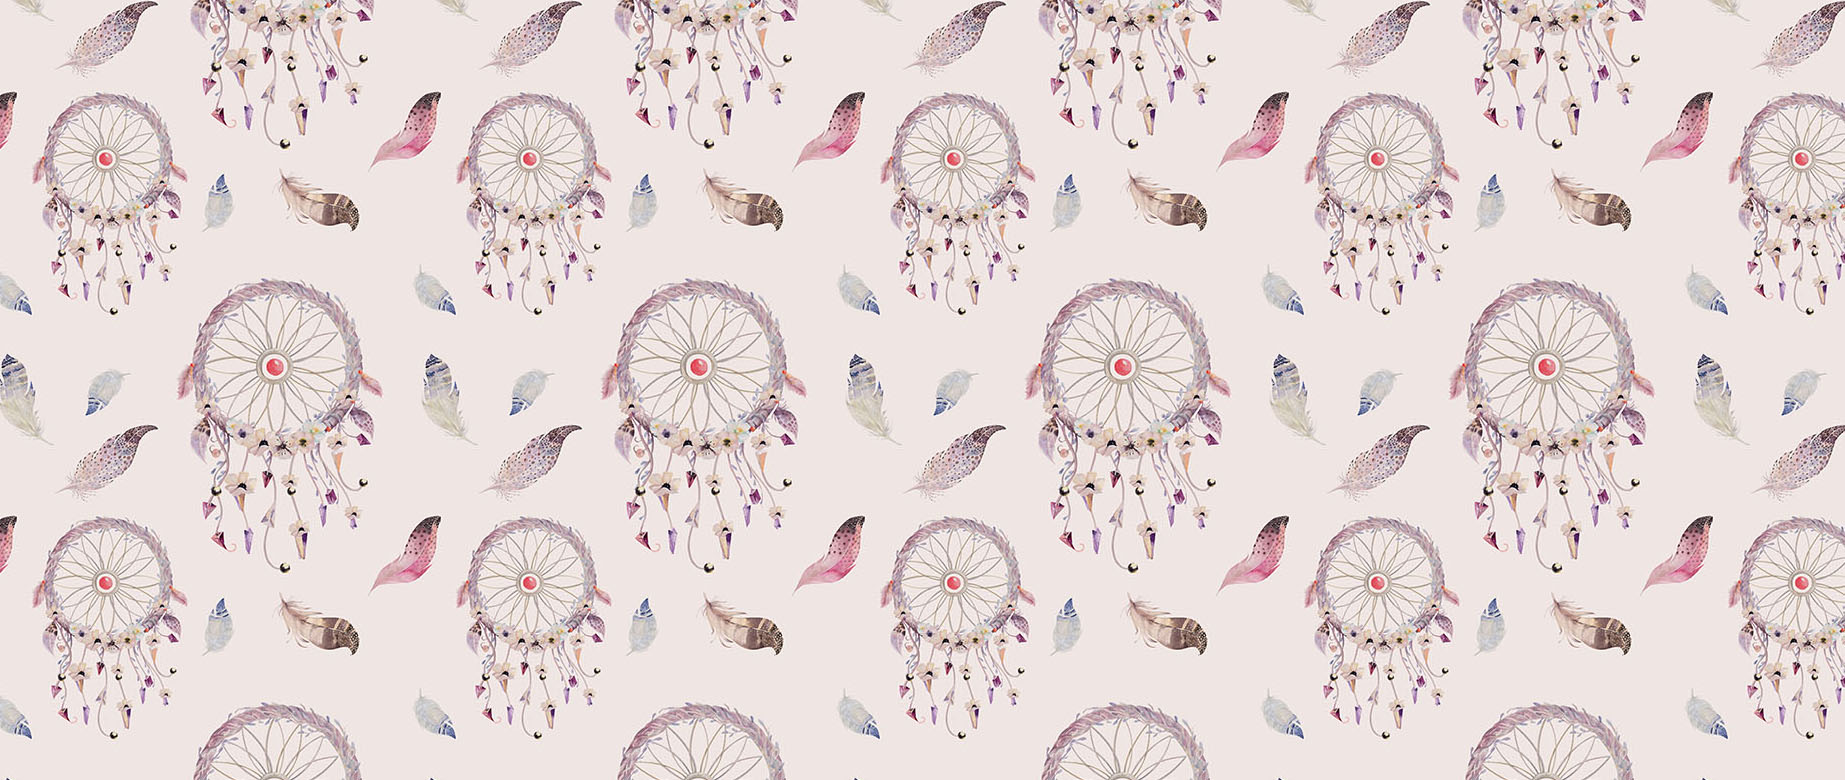 pink-dreamcatcher-with-feathers-wallpaper-seamless-repeat-view